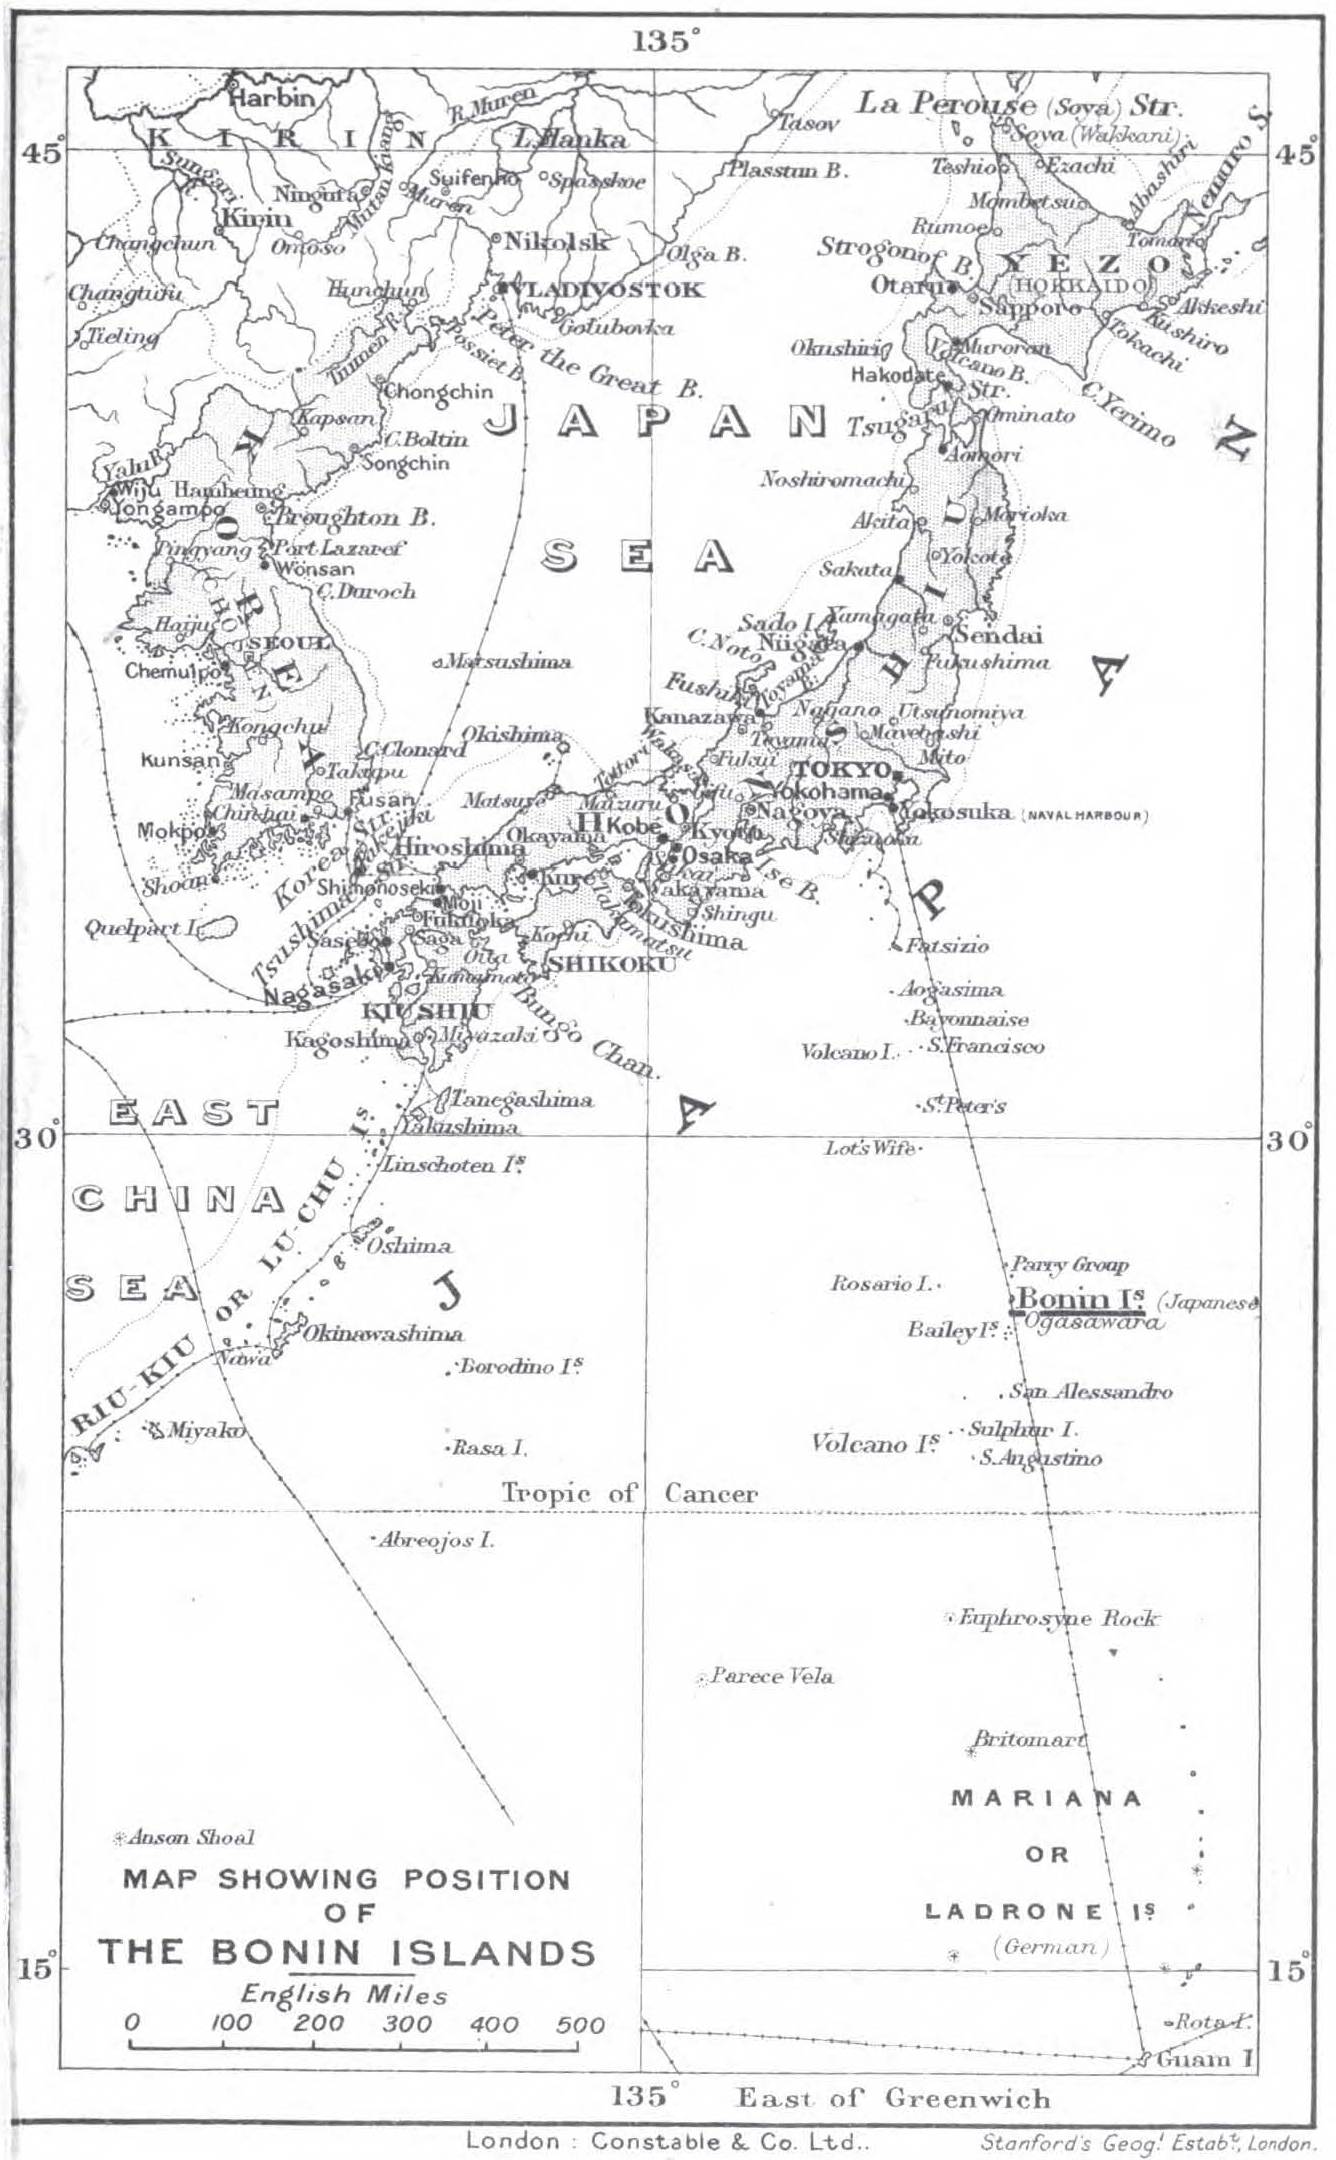 Map Showing Position of the Bonin Islands.